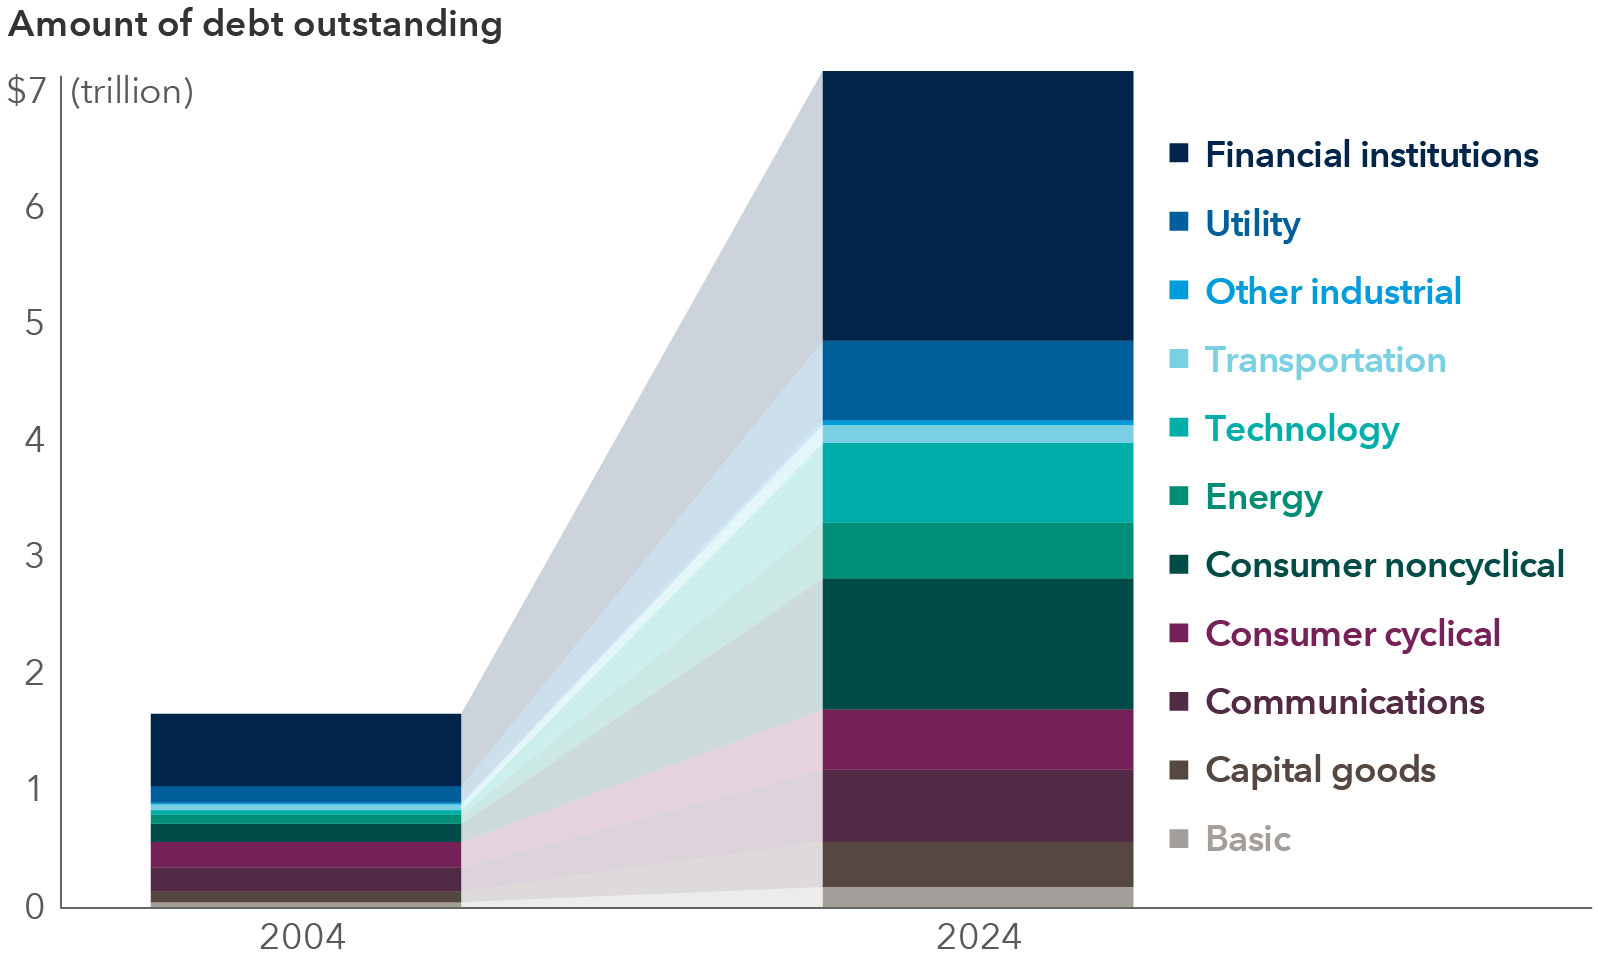 Two stacked bars in the chart above compare the total investment-grade corporate debt outstanding (as represented by the Bloomberg U.S. Corporate Investment Grade Index) in trillions of dollars among various sectors between 2004 and 2024. The vertical bars show a stark contrast in the two decades that separate them. In 2004, the amount outstanding among all sectors totaled less than $US2 trillion. Most sectors like basic, capital goods, communications, and others show less than $US100 billion, with the notable exception of financial institutions, which made up about $US500 billion. By 2024, there’s a significant increase, especially in financial institutions and consumer noncyclical goods. The total amount surpasses $US7 trillion and shows substantial growth in debt among all sectors, including basic, capital goods, communications, consumer cyclical goods, energy, technology, transportation, other industrial and utilities over the twenty-year span. The y-axis is marked in increments of $US1 trillion.